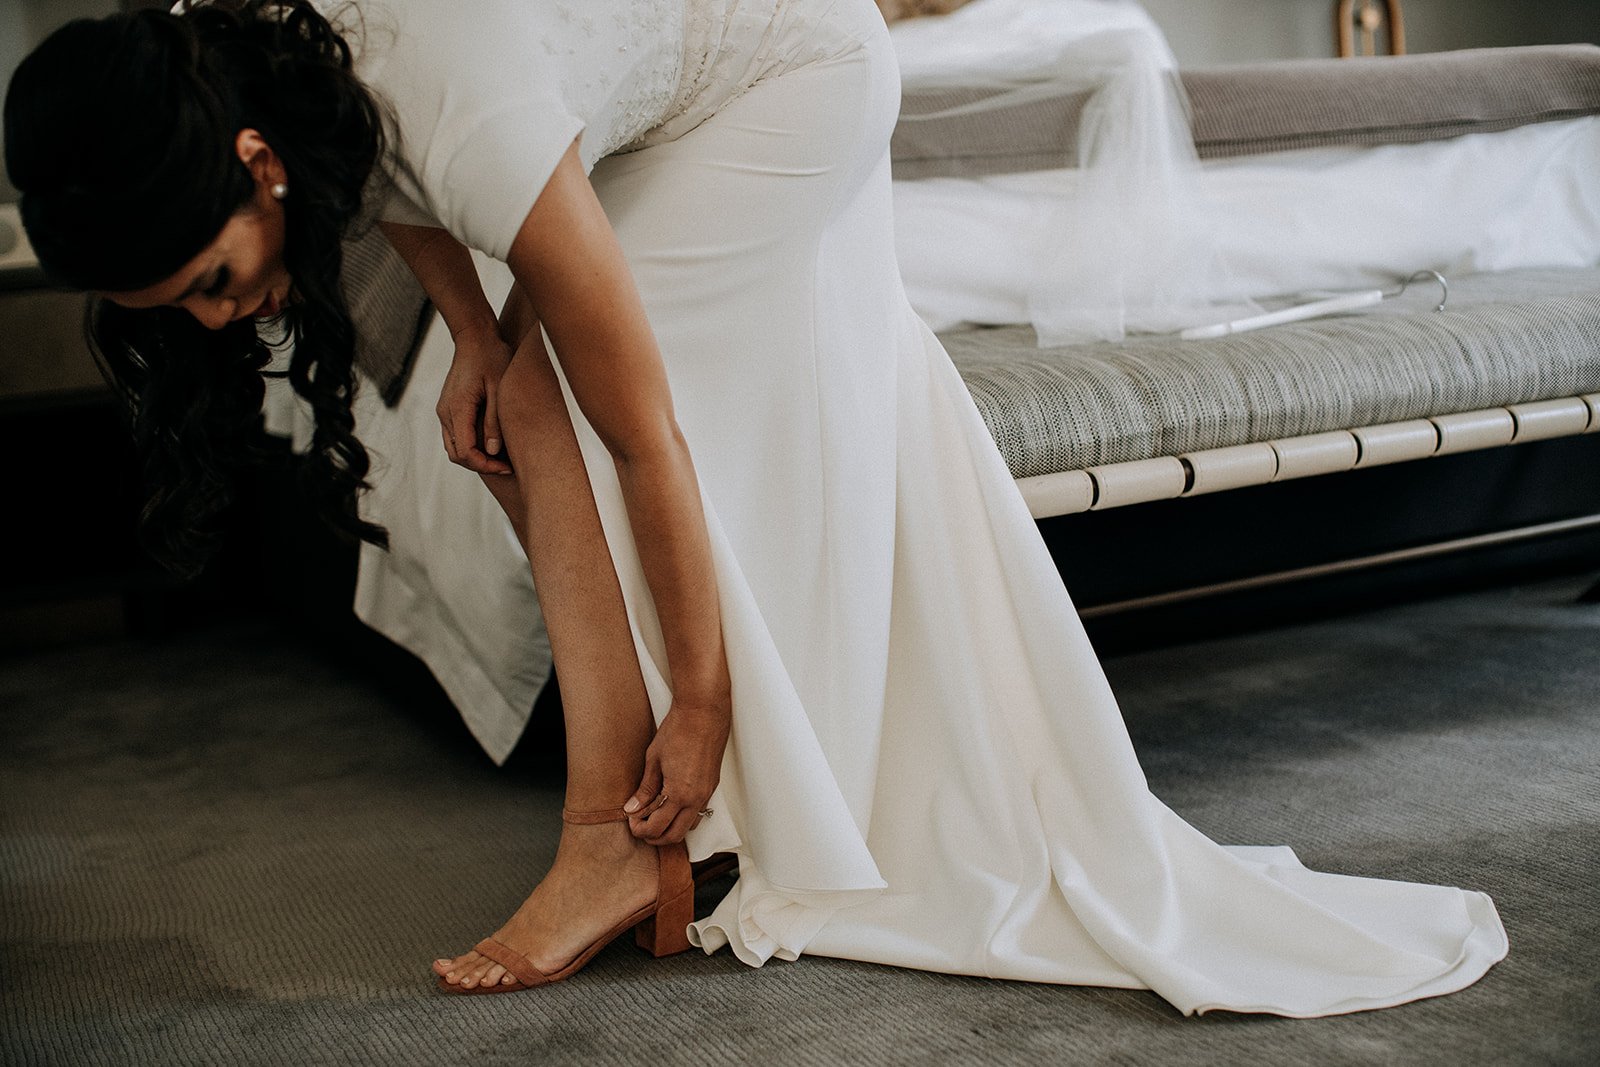  bride putting on her shoe in front of bed 